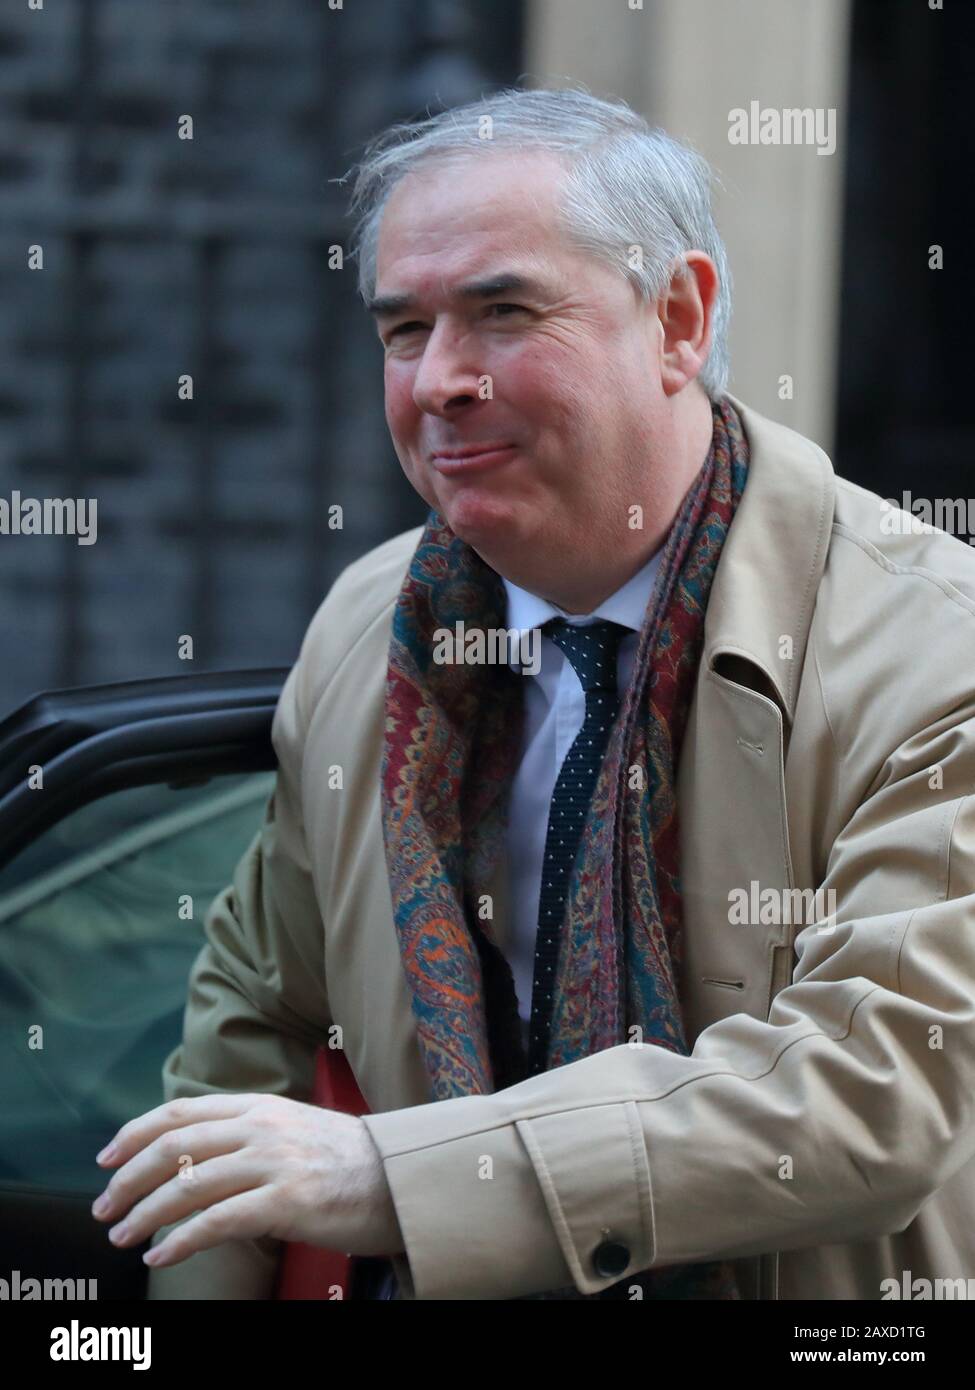 London, UK, 11th Feb 2020, Attorney General Geoffrey Cox arriving for their weekly Cabinet Meeting. Credit: Uwe Deffner / Alamy Live News. Live News. Stock Photo